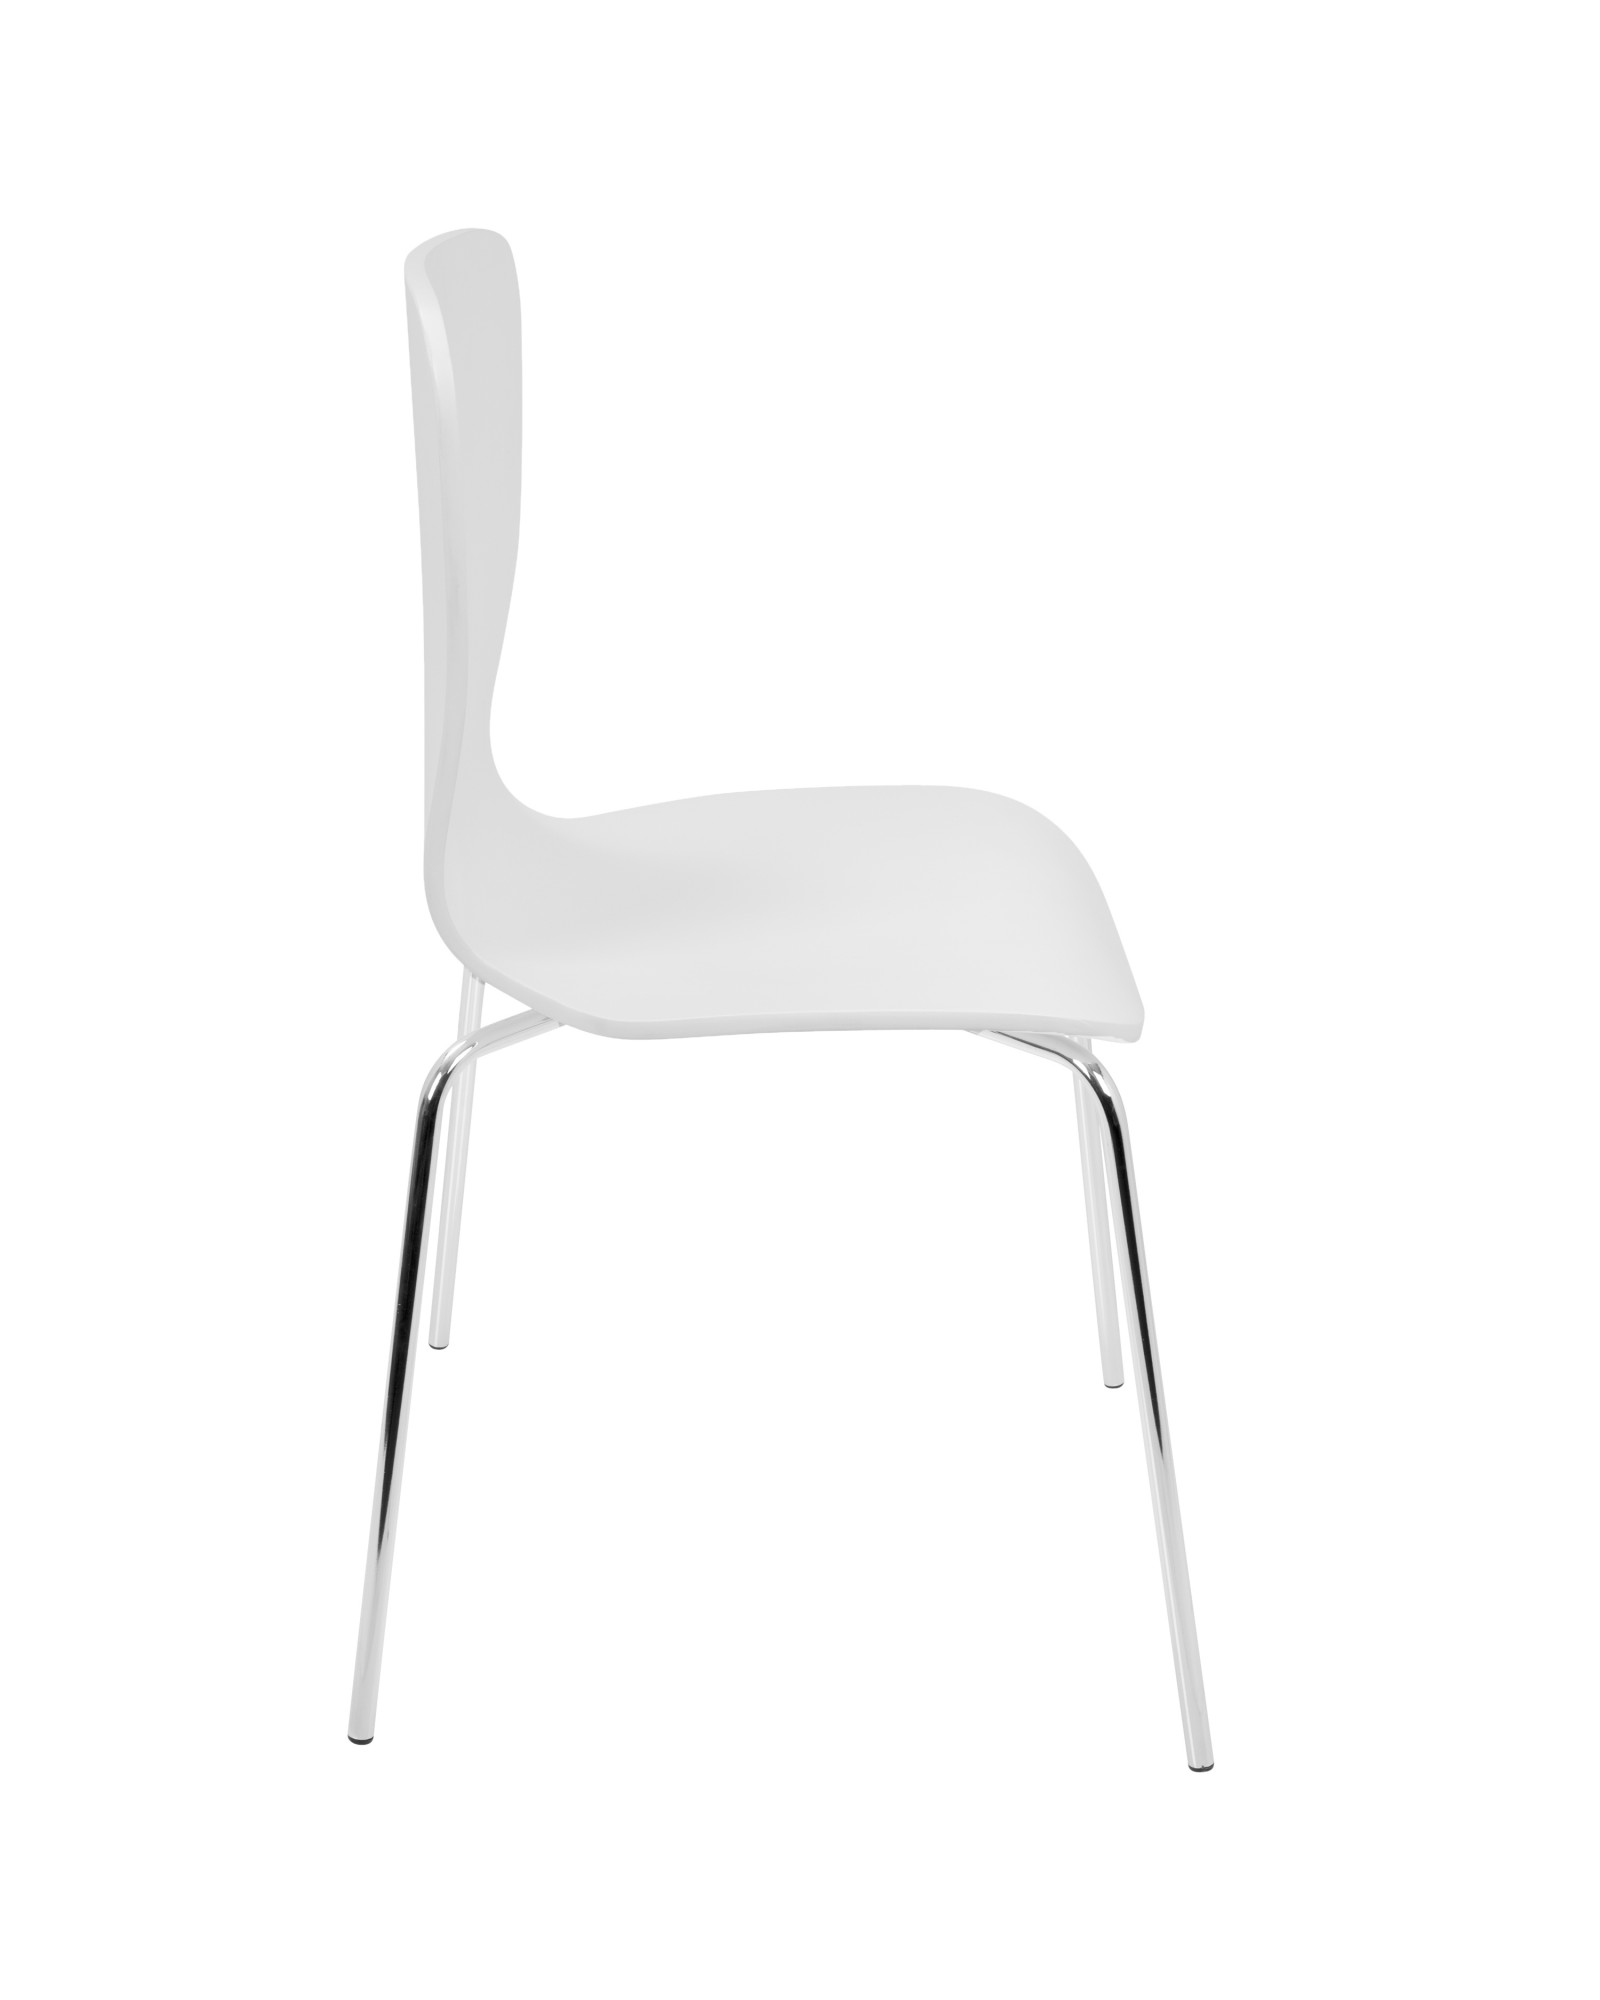 Woodstacker Contemporary Dining Chairs in White -Set of 4